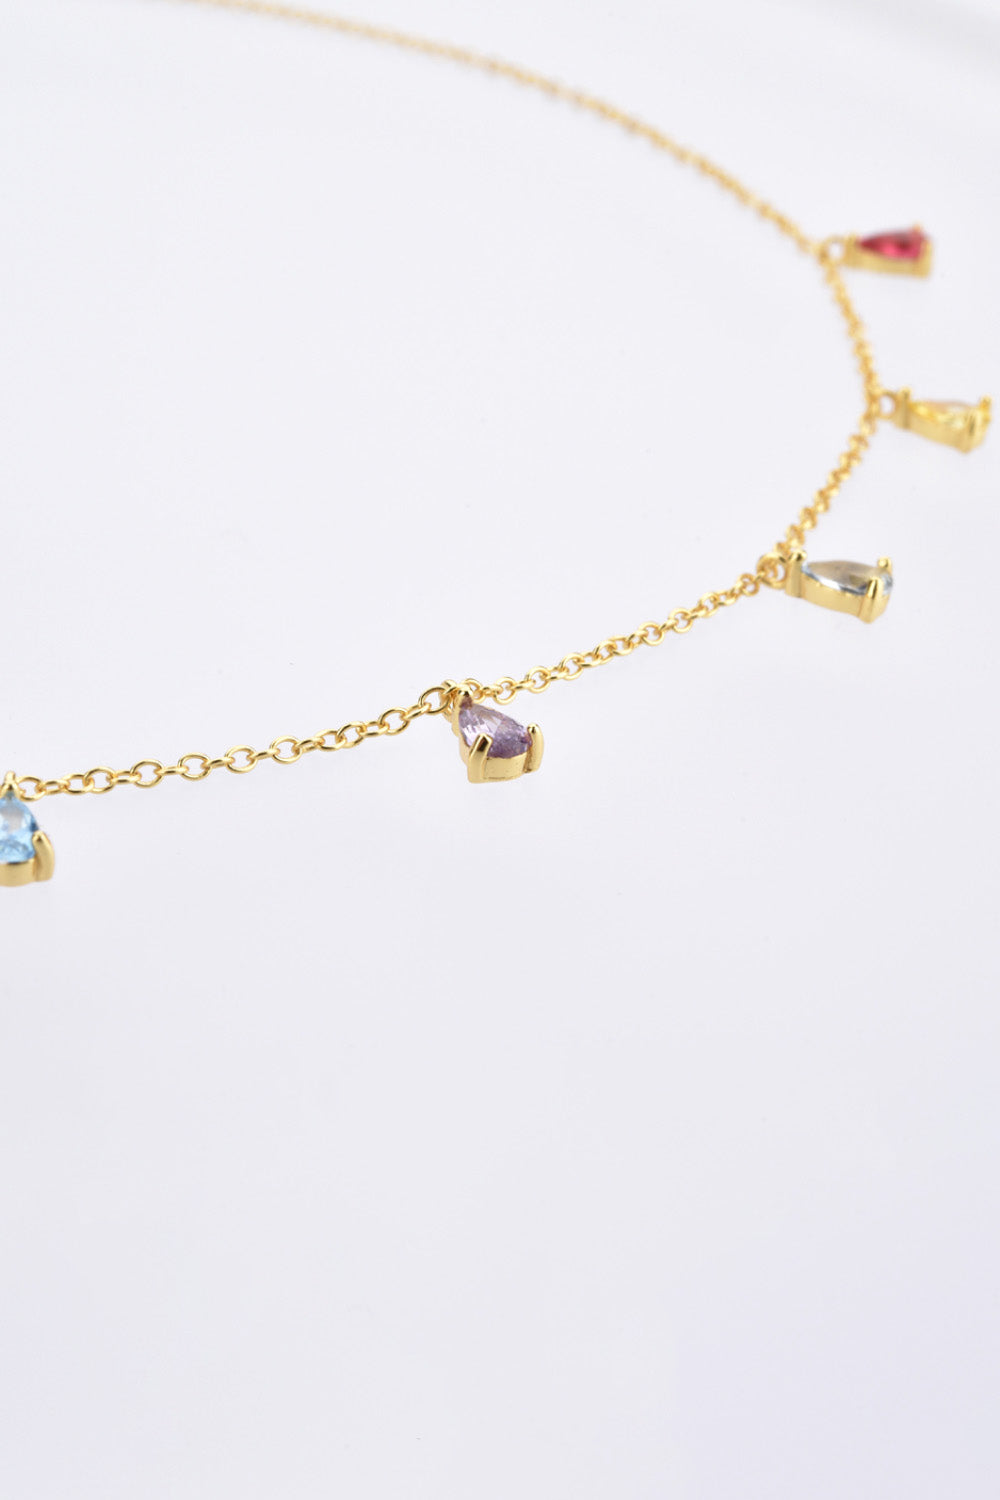 Multi-Stone Zircon Necklace in Sterling Silver or Gold Plated